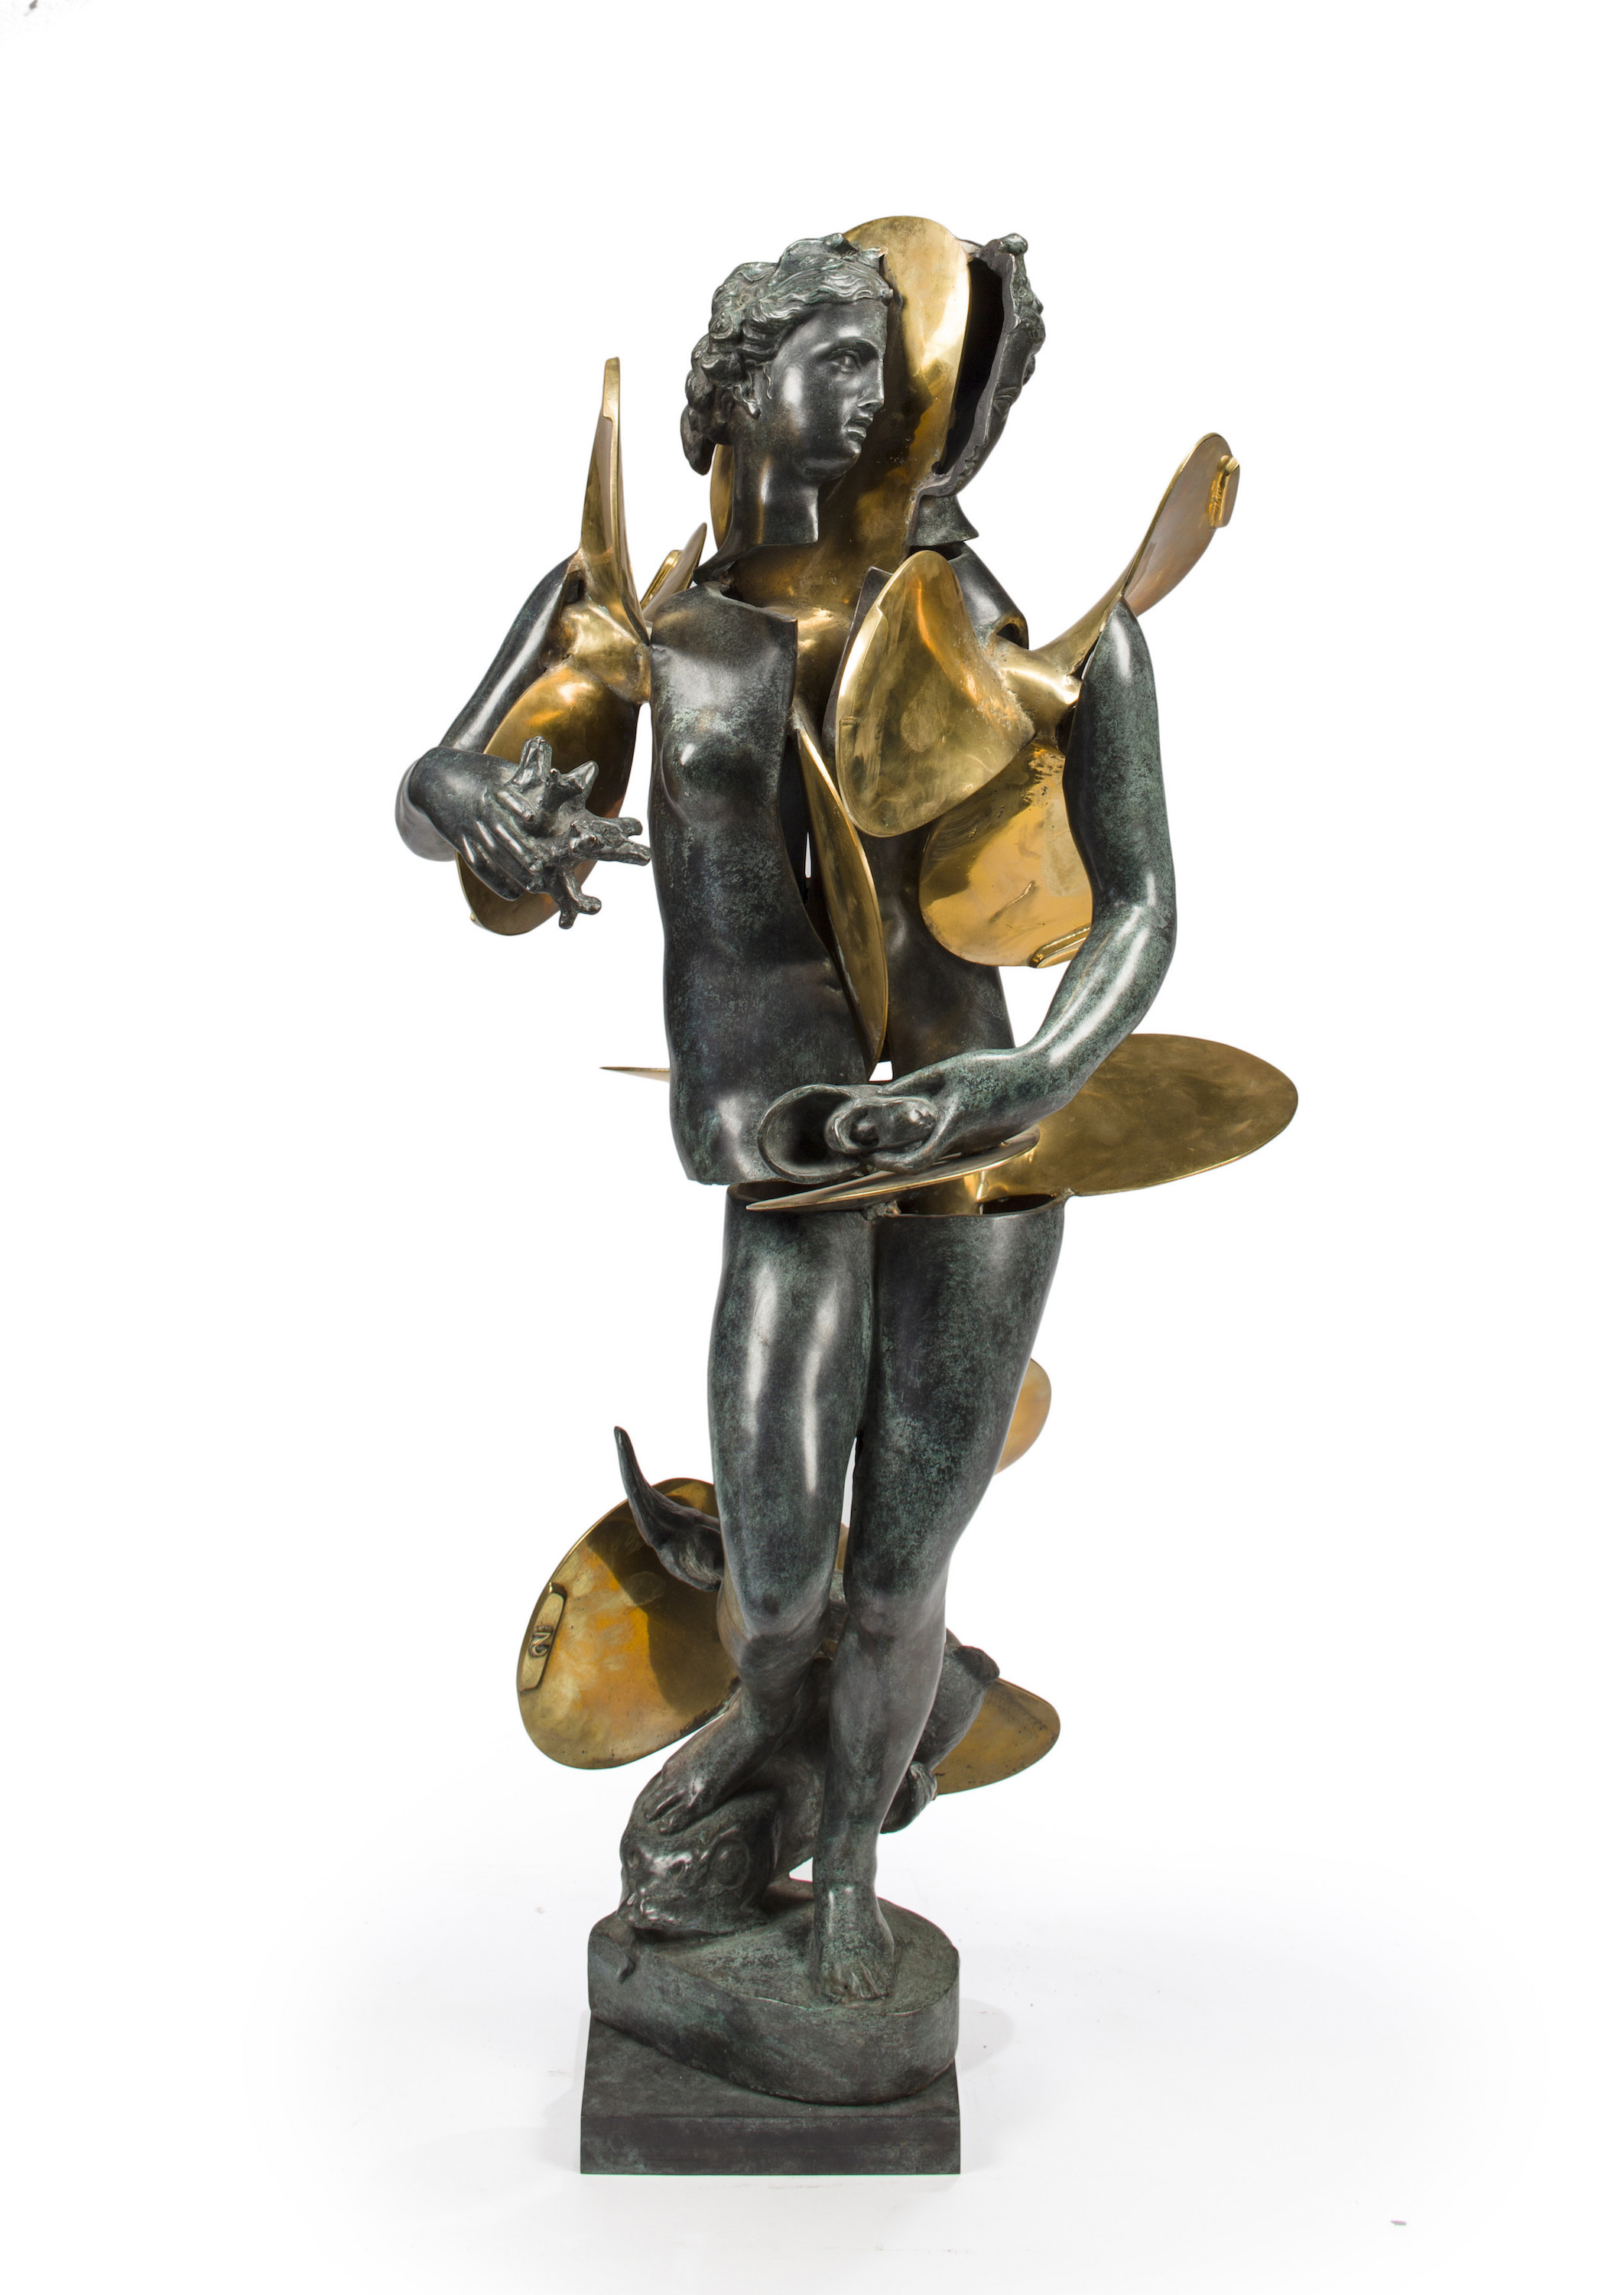 Arman (1928-2005), ‘Untitled (Amphitrite with propellors),’ cast bronze, 42 x 24 x 16 inches, 1990. Estimate: $9,000-$12,000. Carlyle Galleries International image 